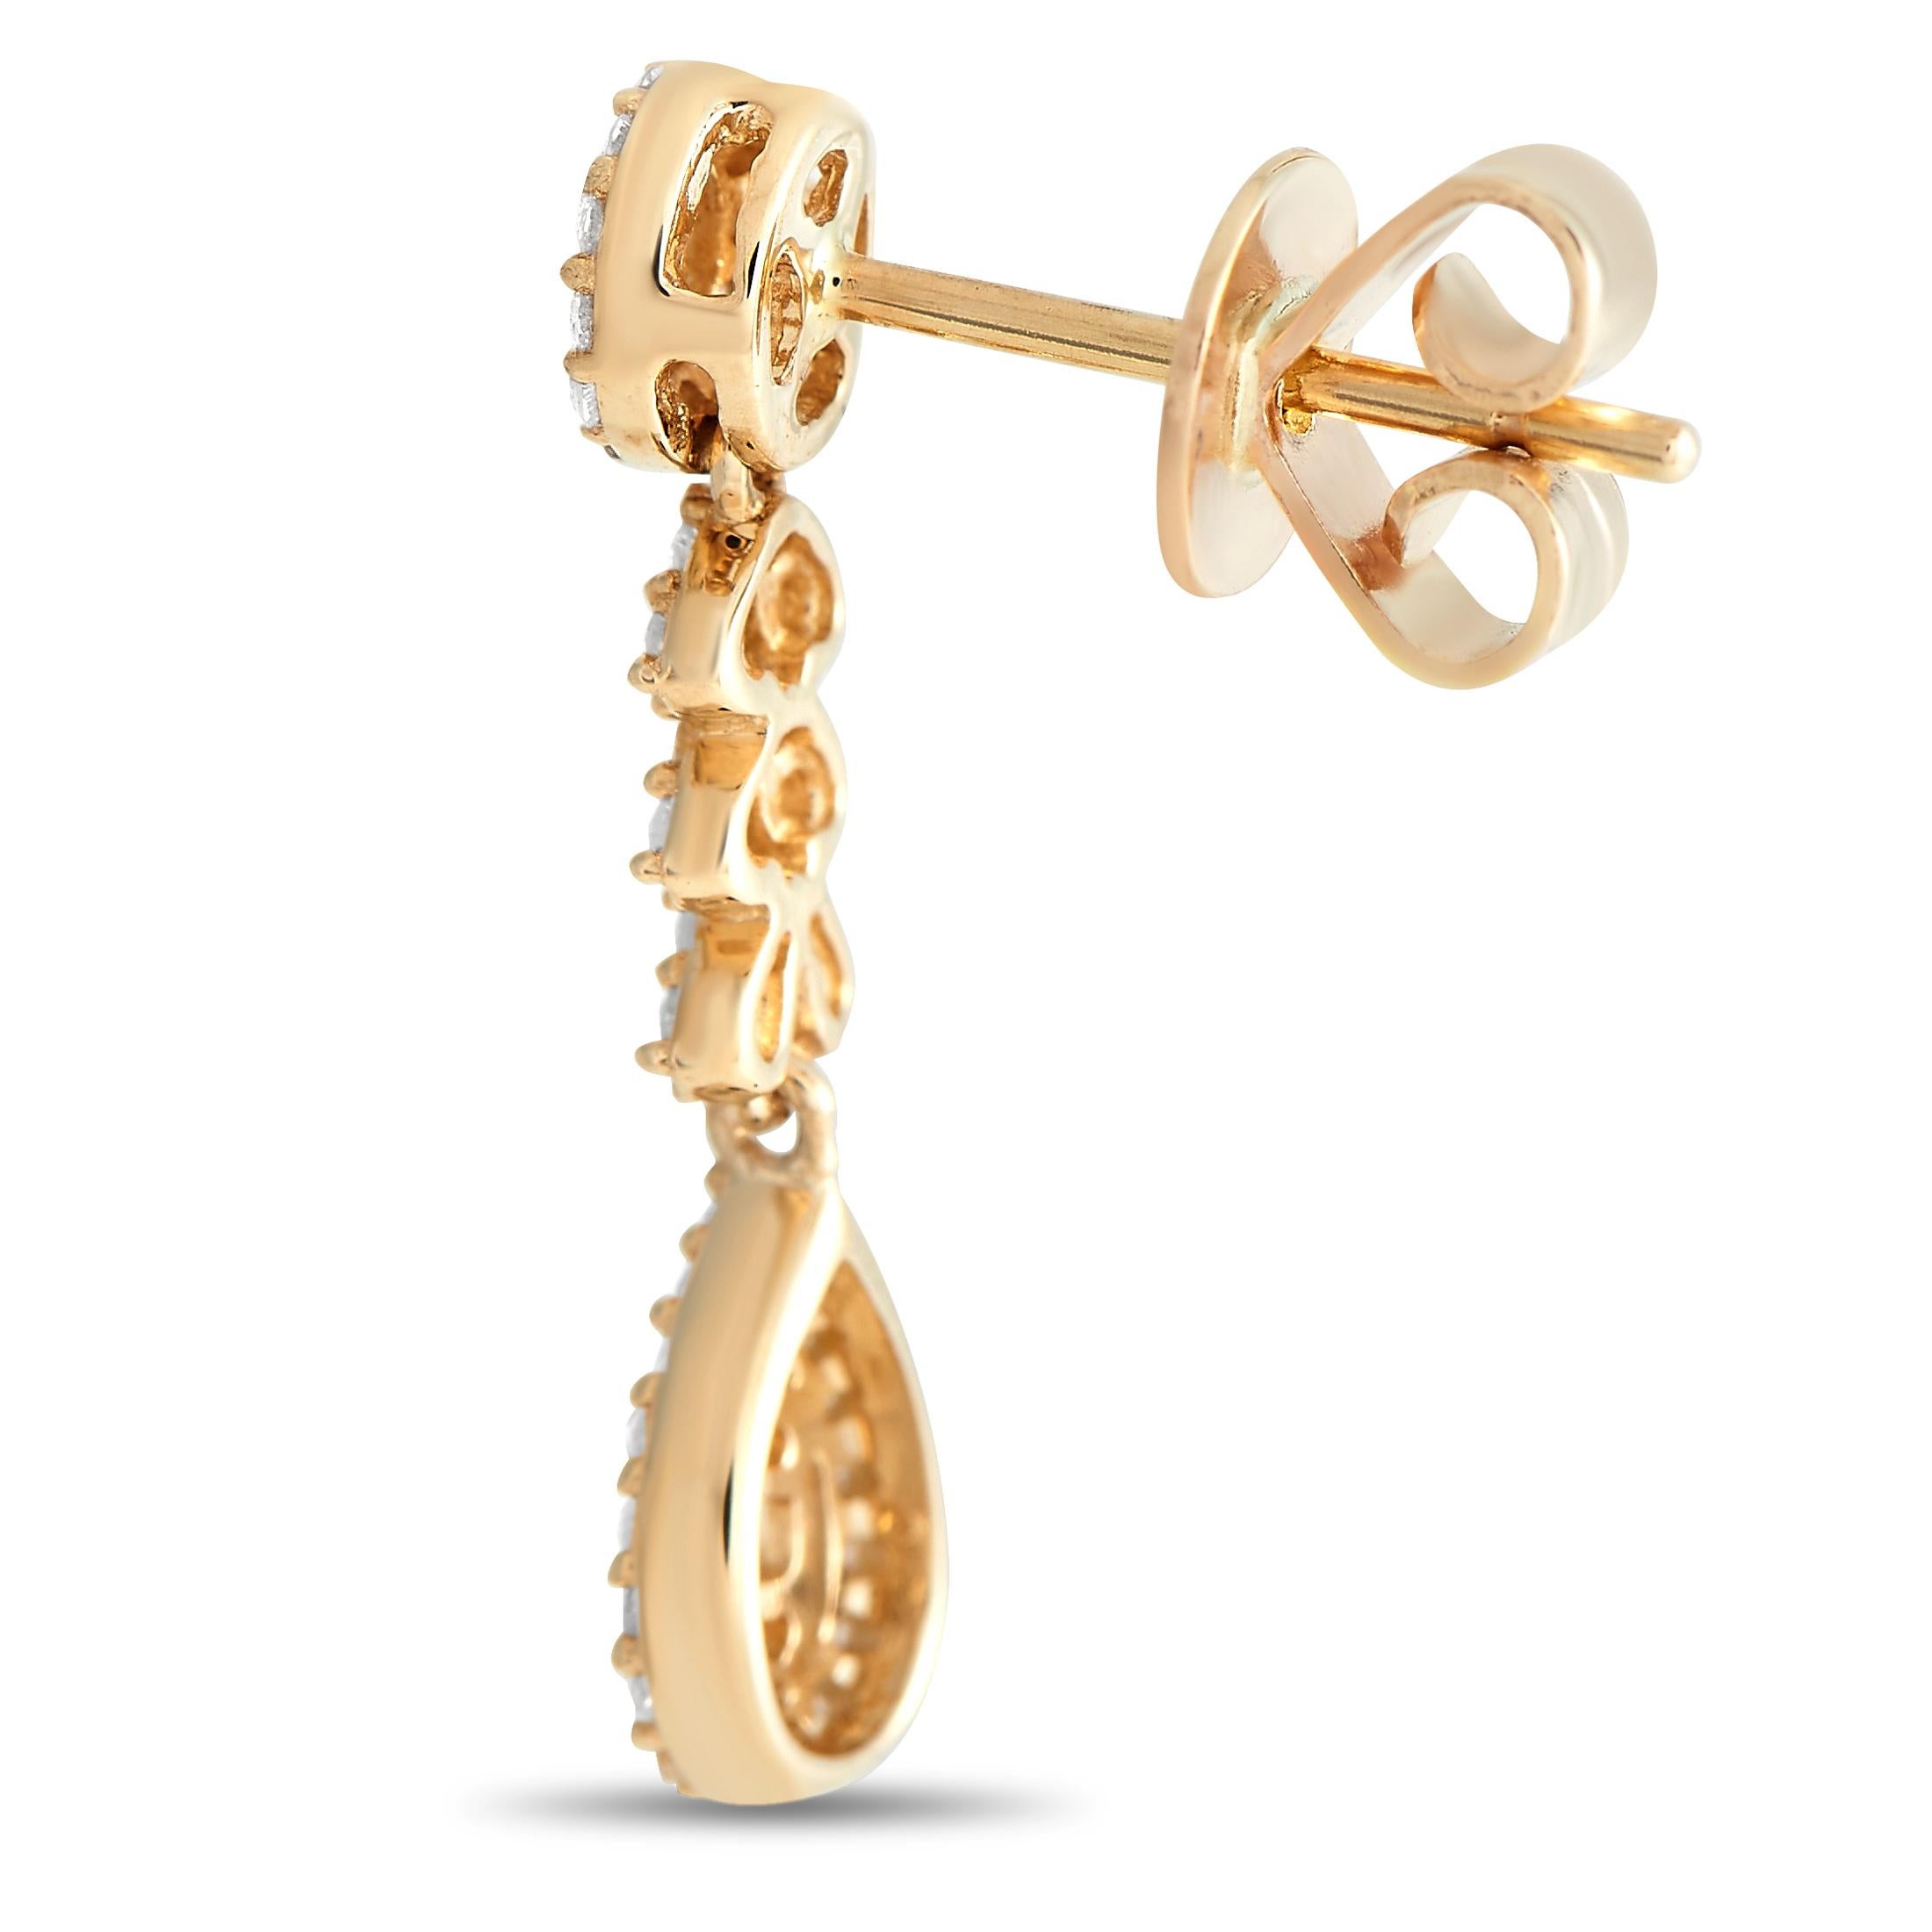 Diamonds with a total weight of 0.35 carats make these earrings simply unforgettable. A classic accessory that will continually impress, each one features a detailed 14K yellow gold setting that measures 0.80” long and 0.25” wide. 
 
 This jewelry